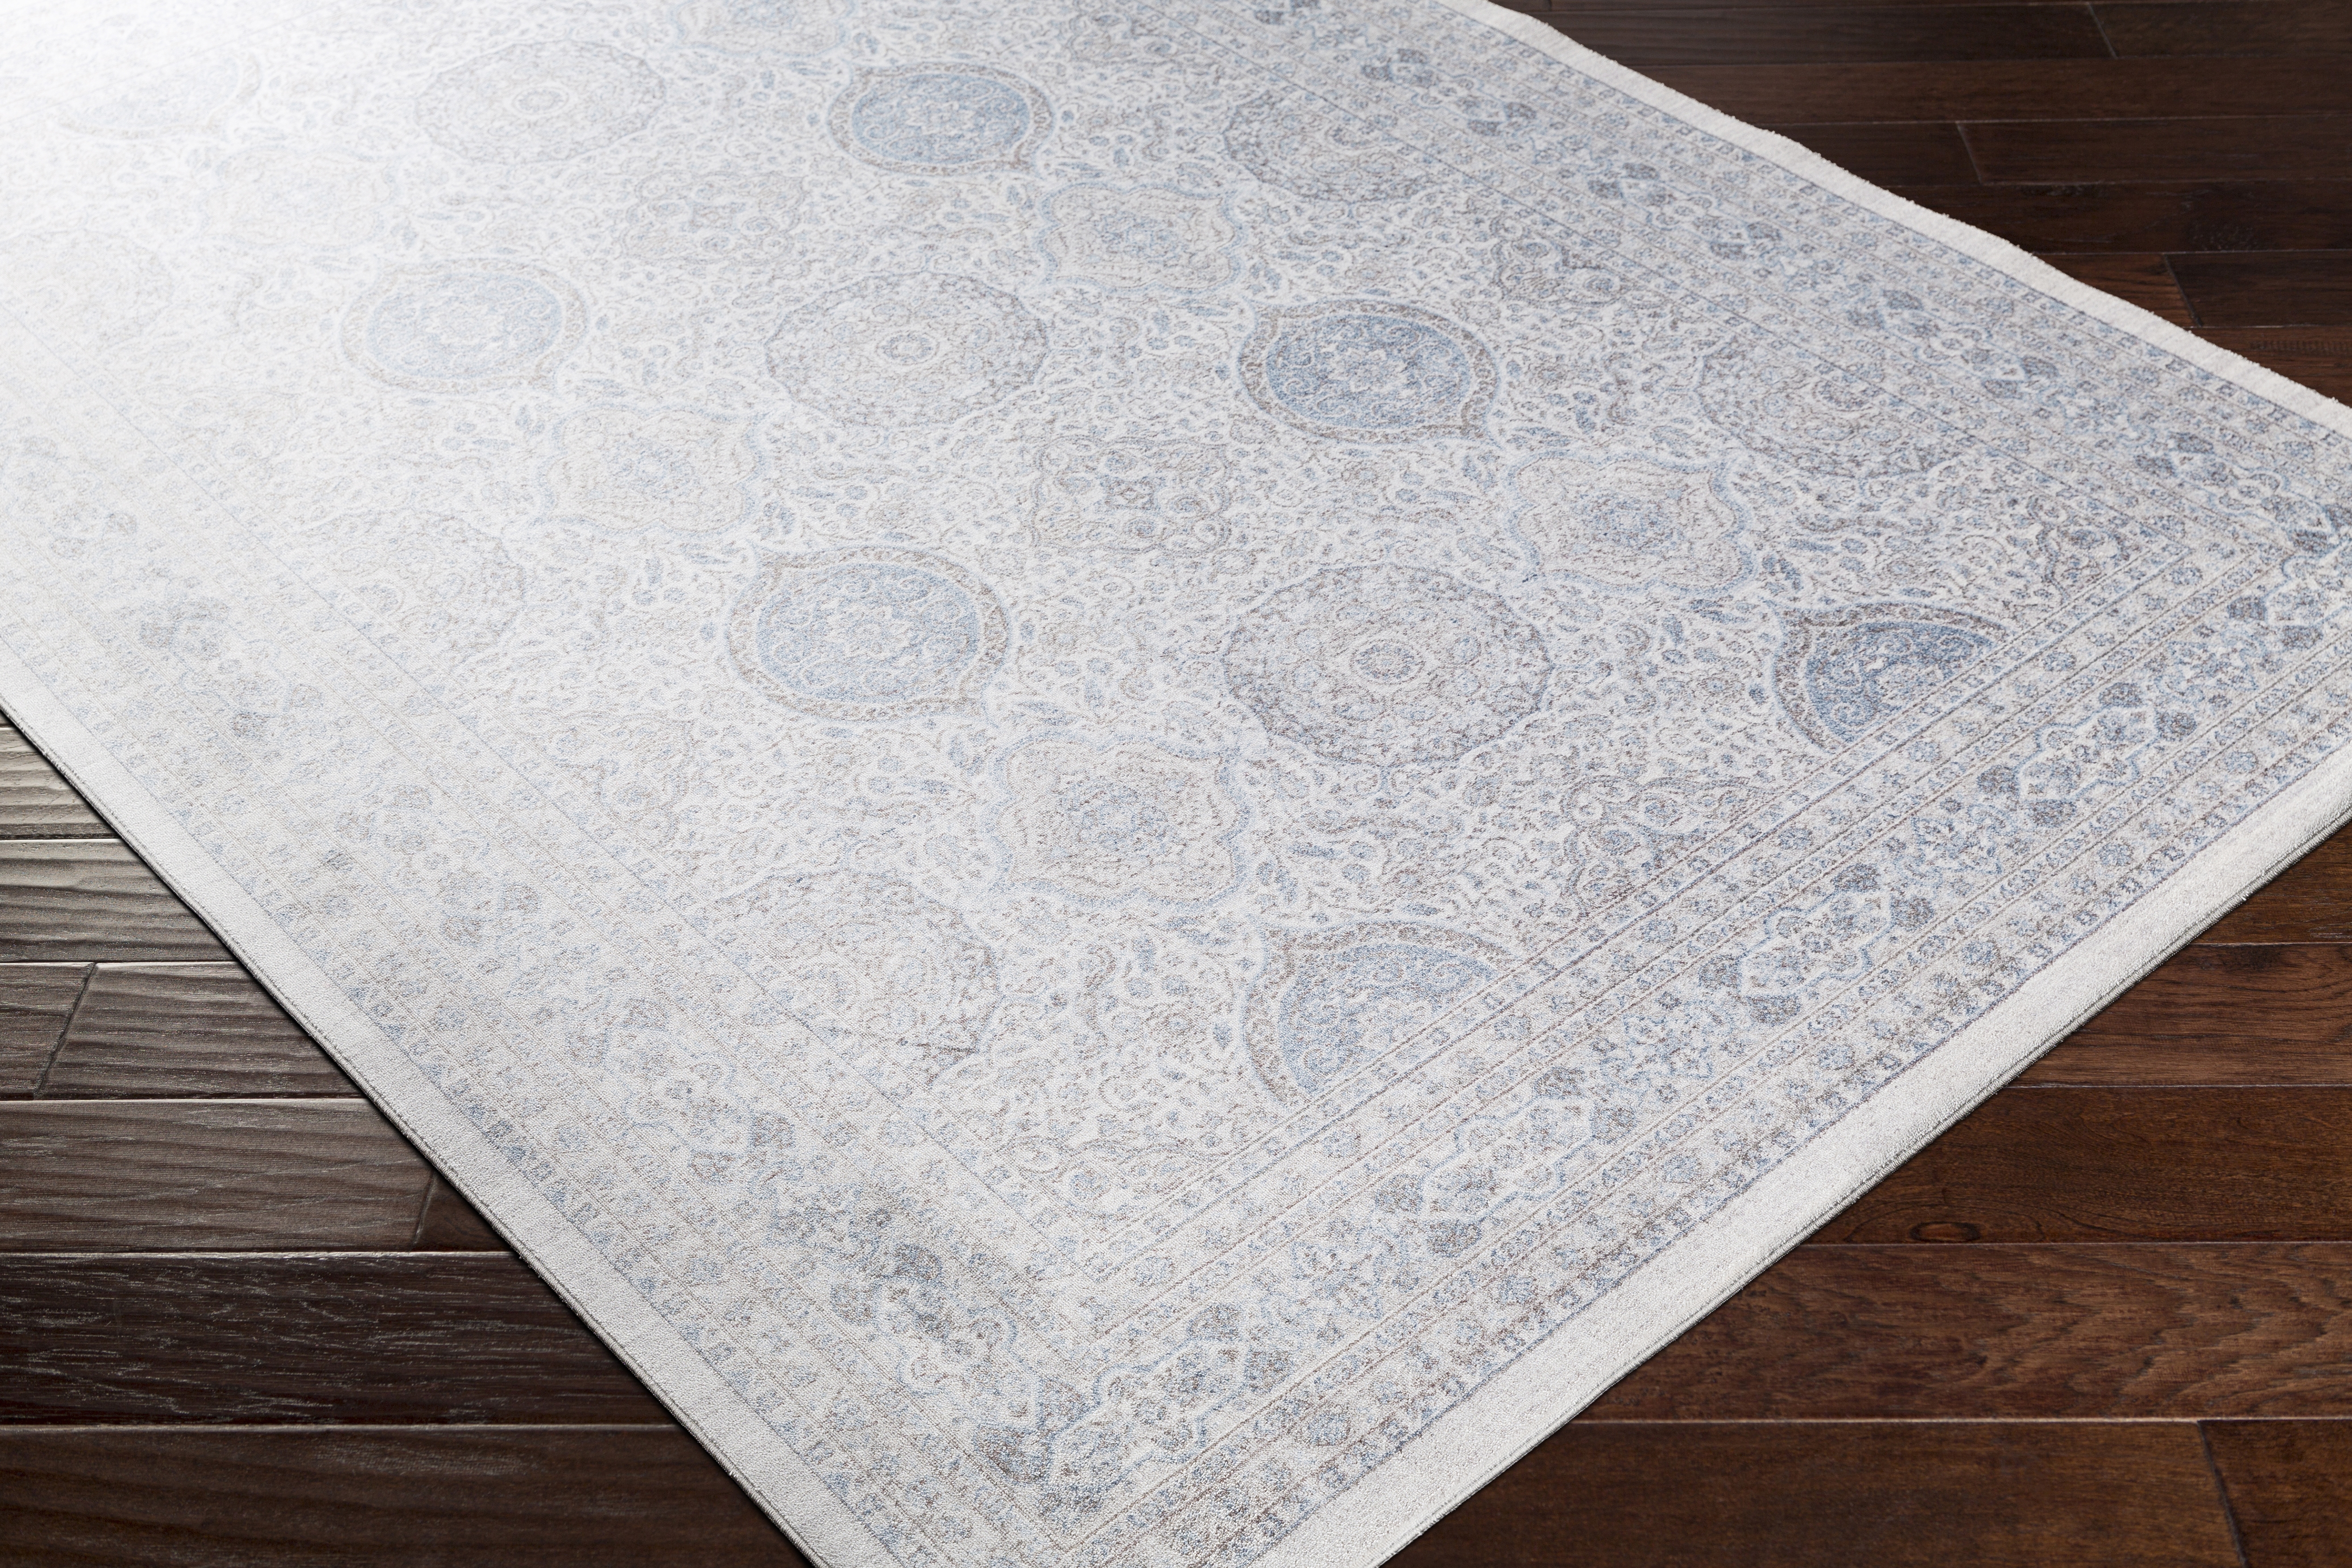 Couture Rug, 8'10" x 12' - Image 2